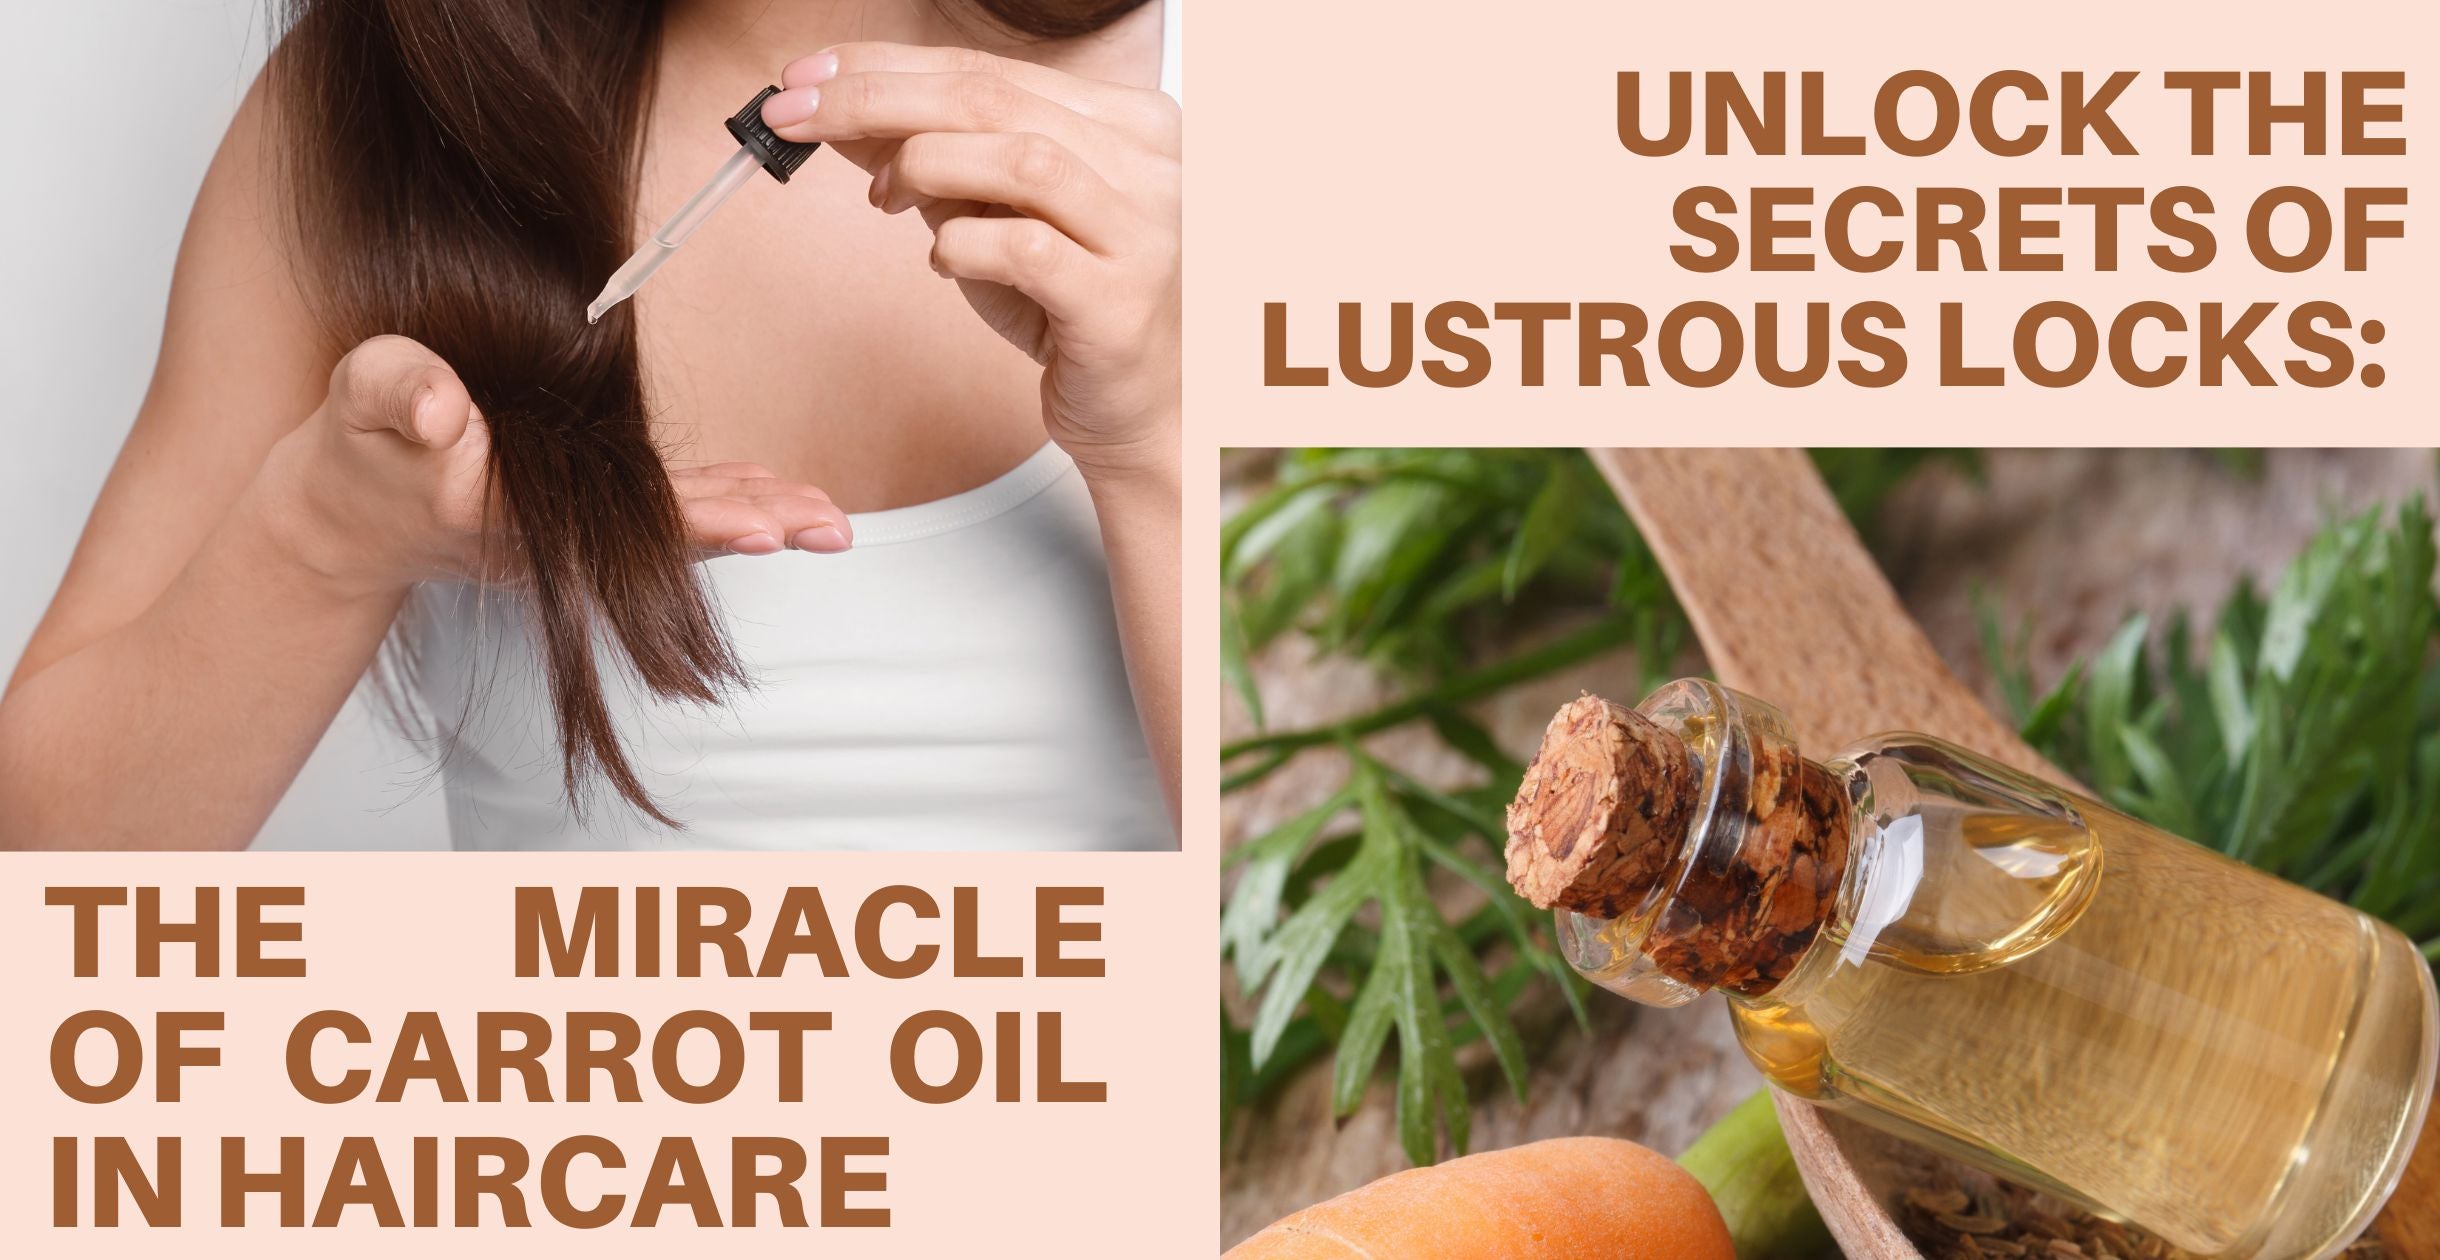 Unlock the Secrets of Lustrous Locks: The Miracle of Carrot Oil in Haircare